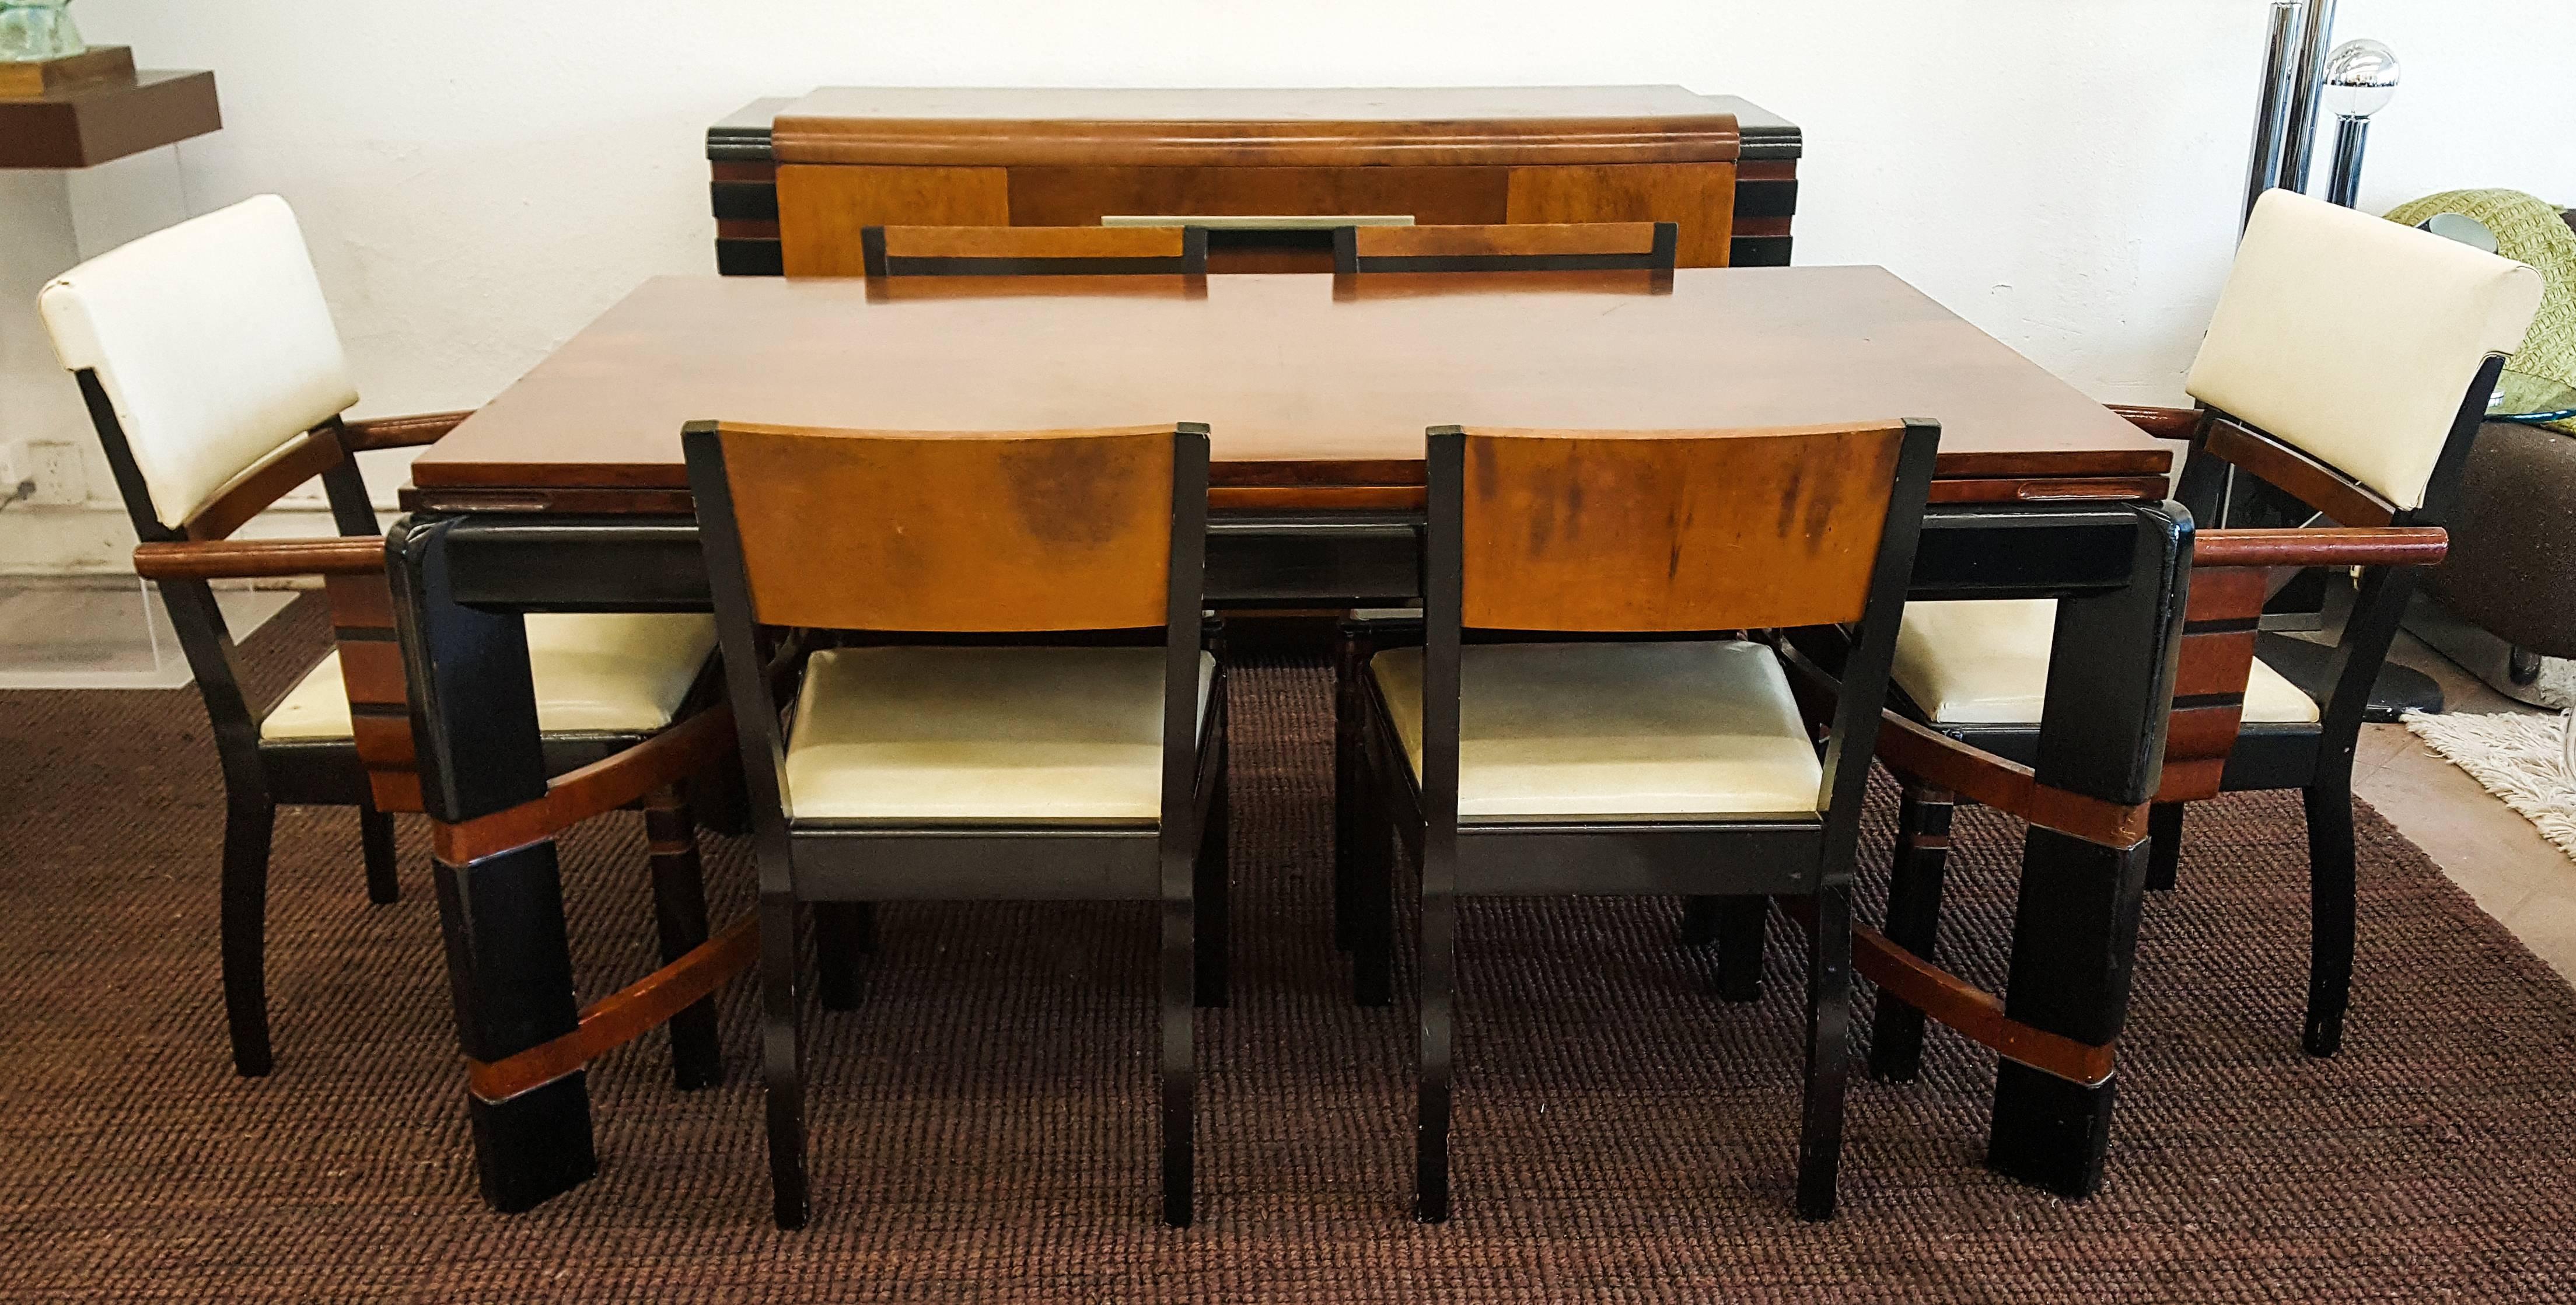 A stunning dining set with by Donald Deskey (American 1894-1989). Deskey was one of America's premier modernist designers, creating the interiors of Radio City Music Hall, as well as packaging for such everyday items as the Crest toothpaste tube. He